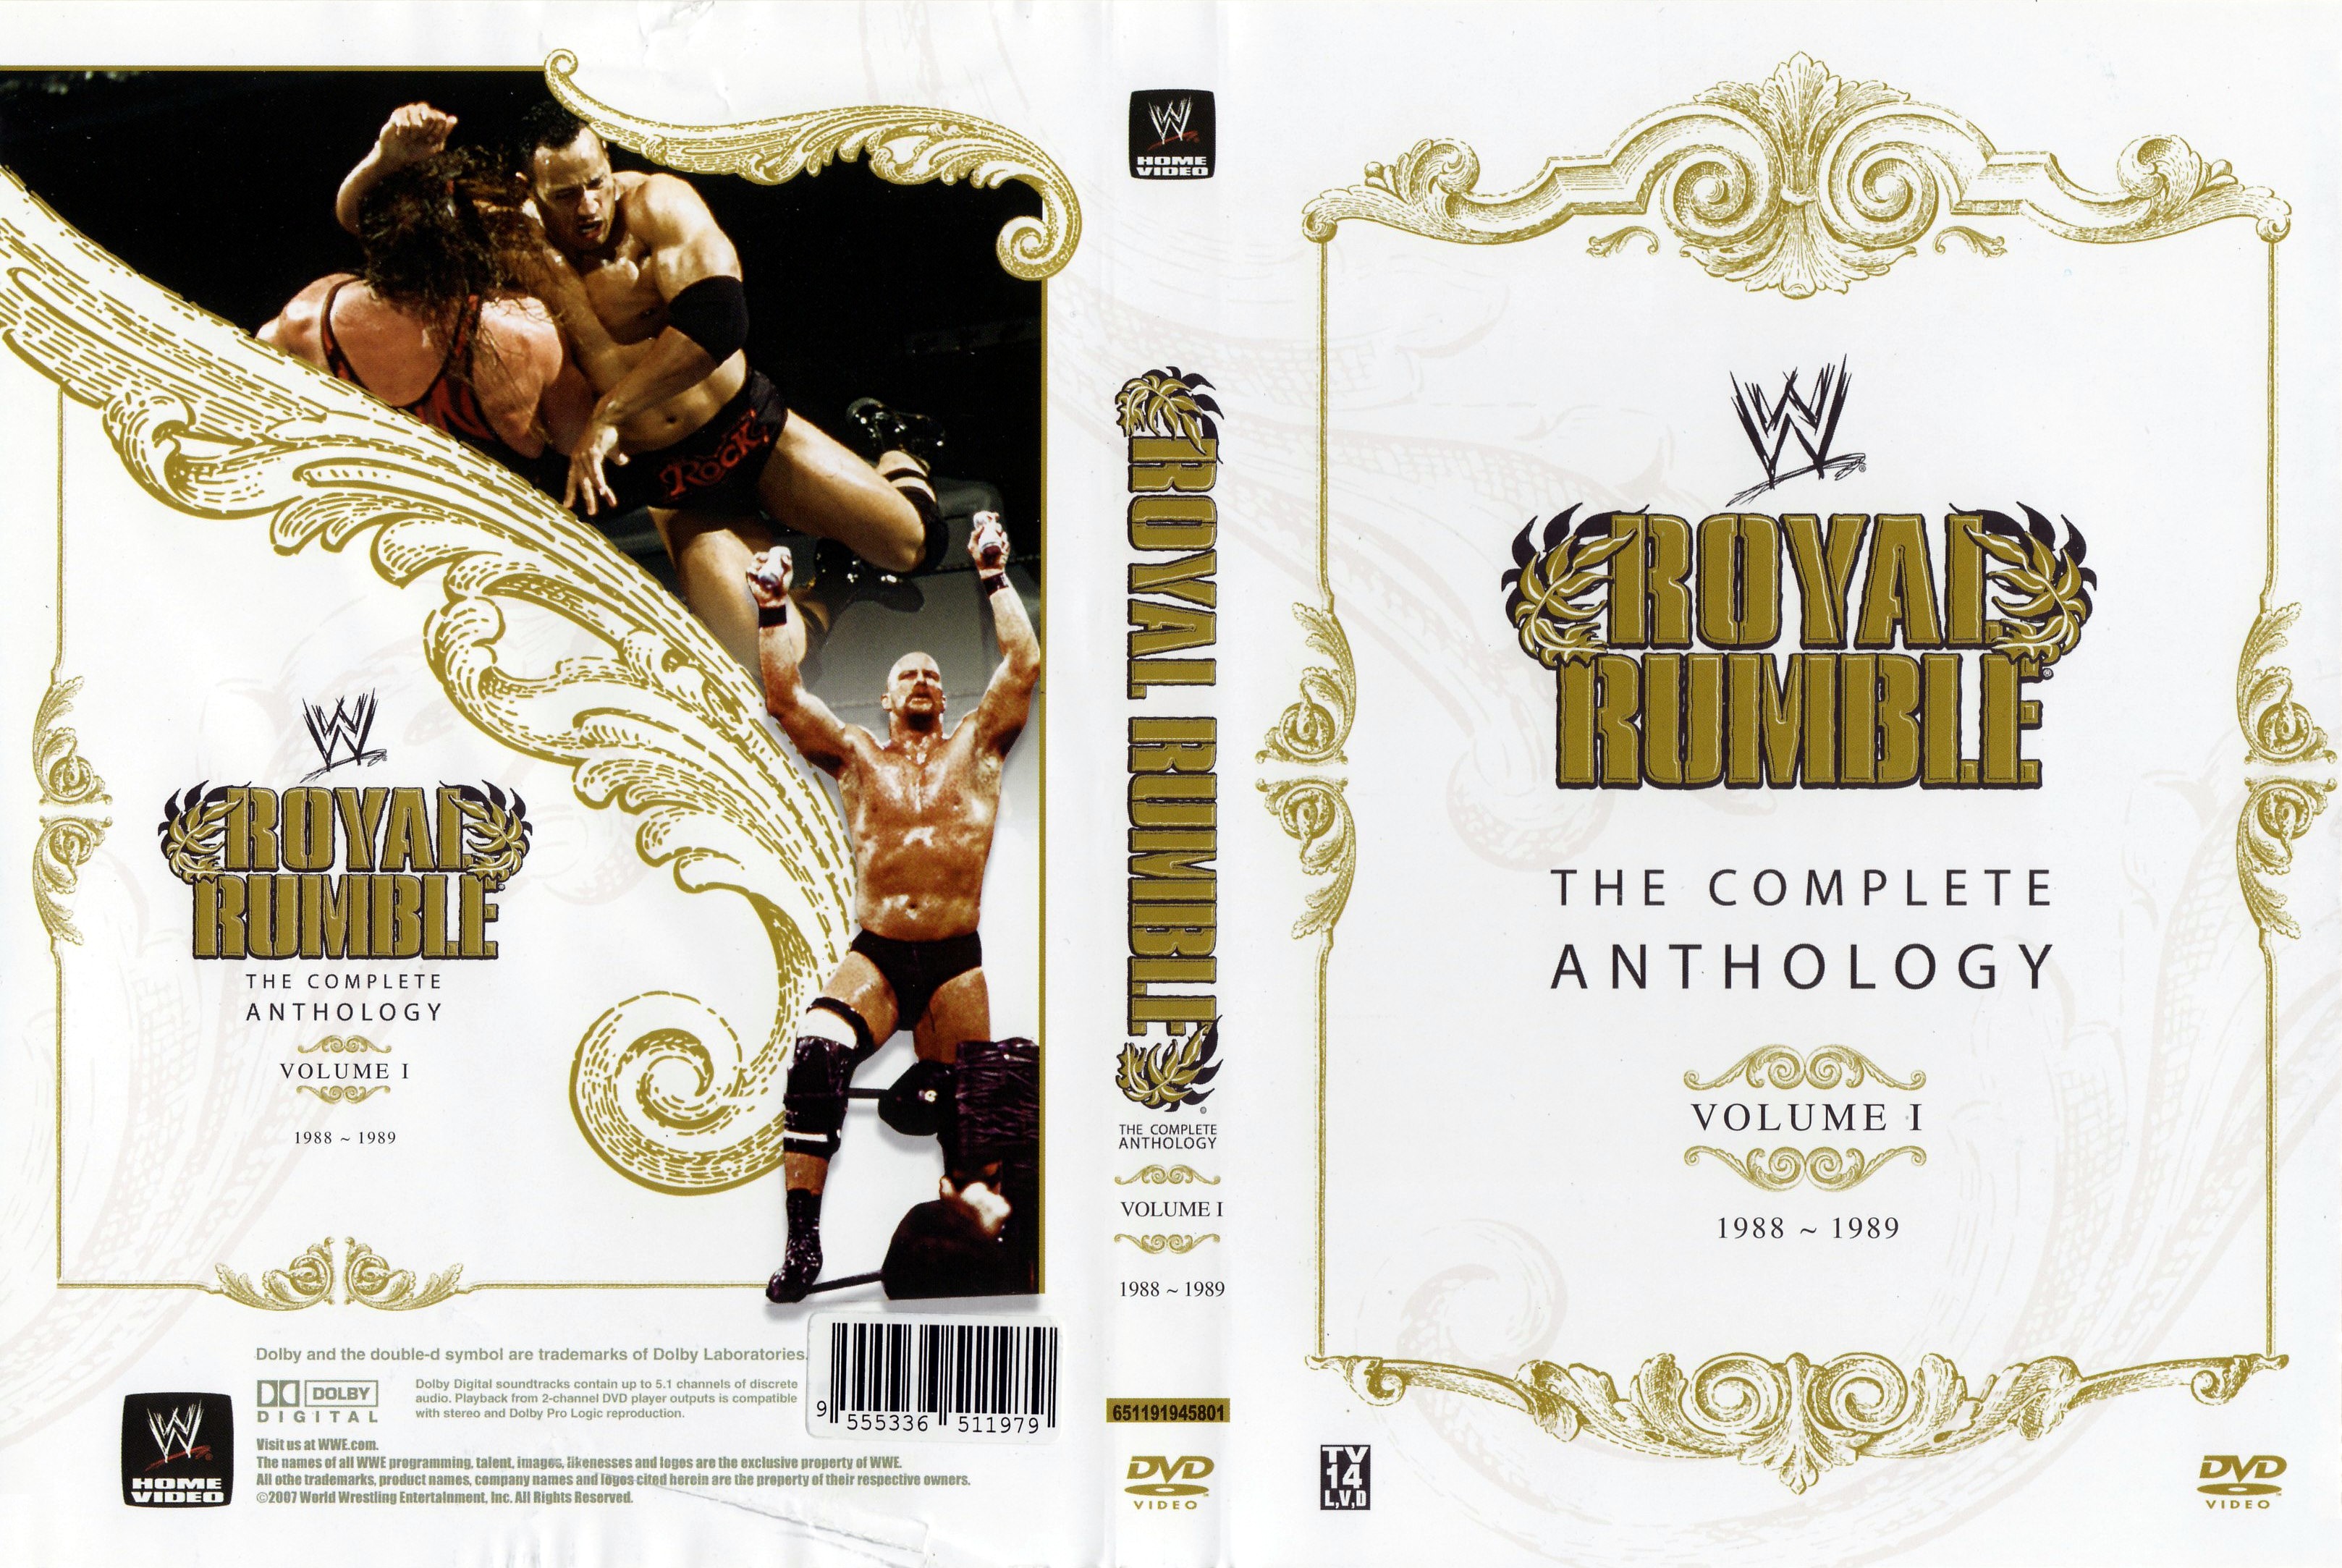 Jaquette DVD WWE Royal Rumble the complete antology vol 01